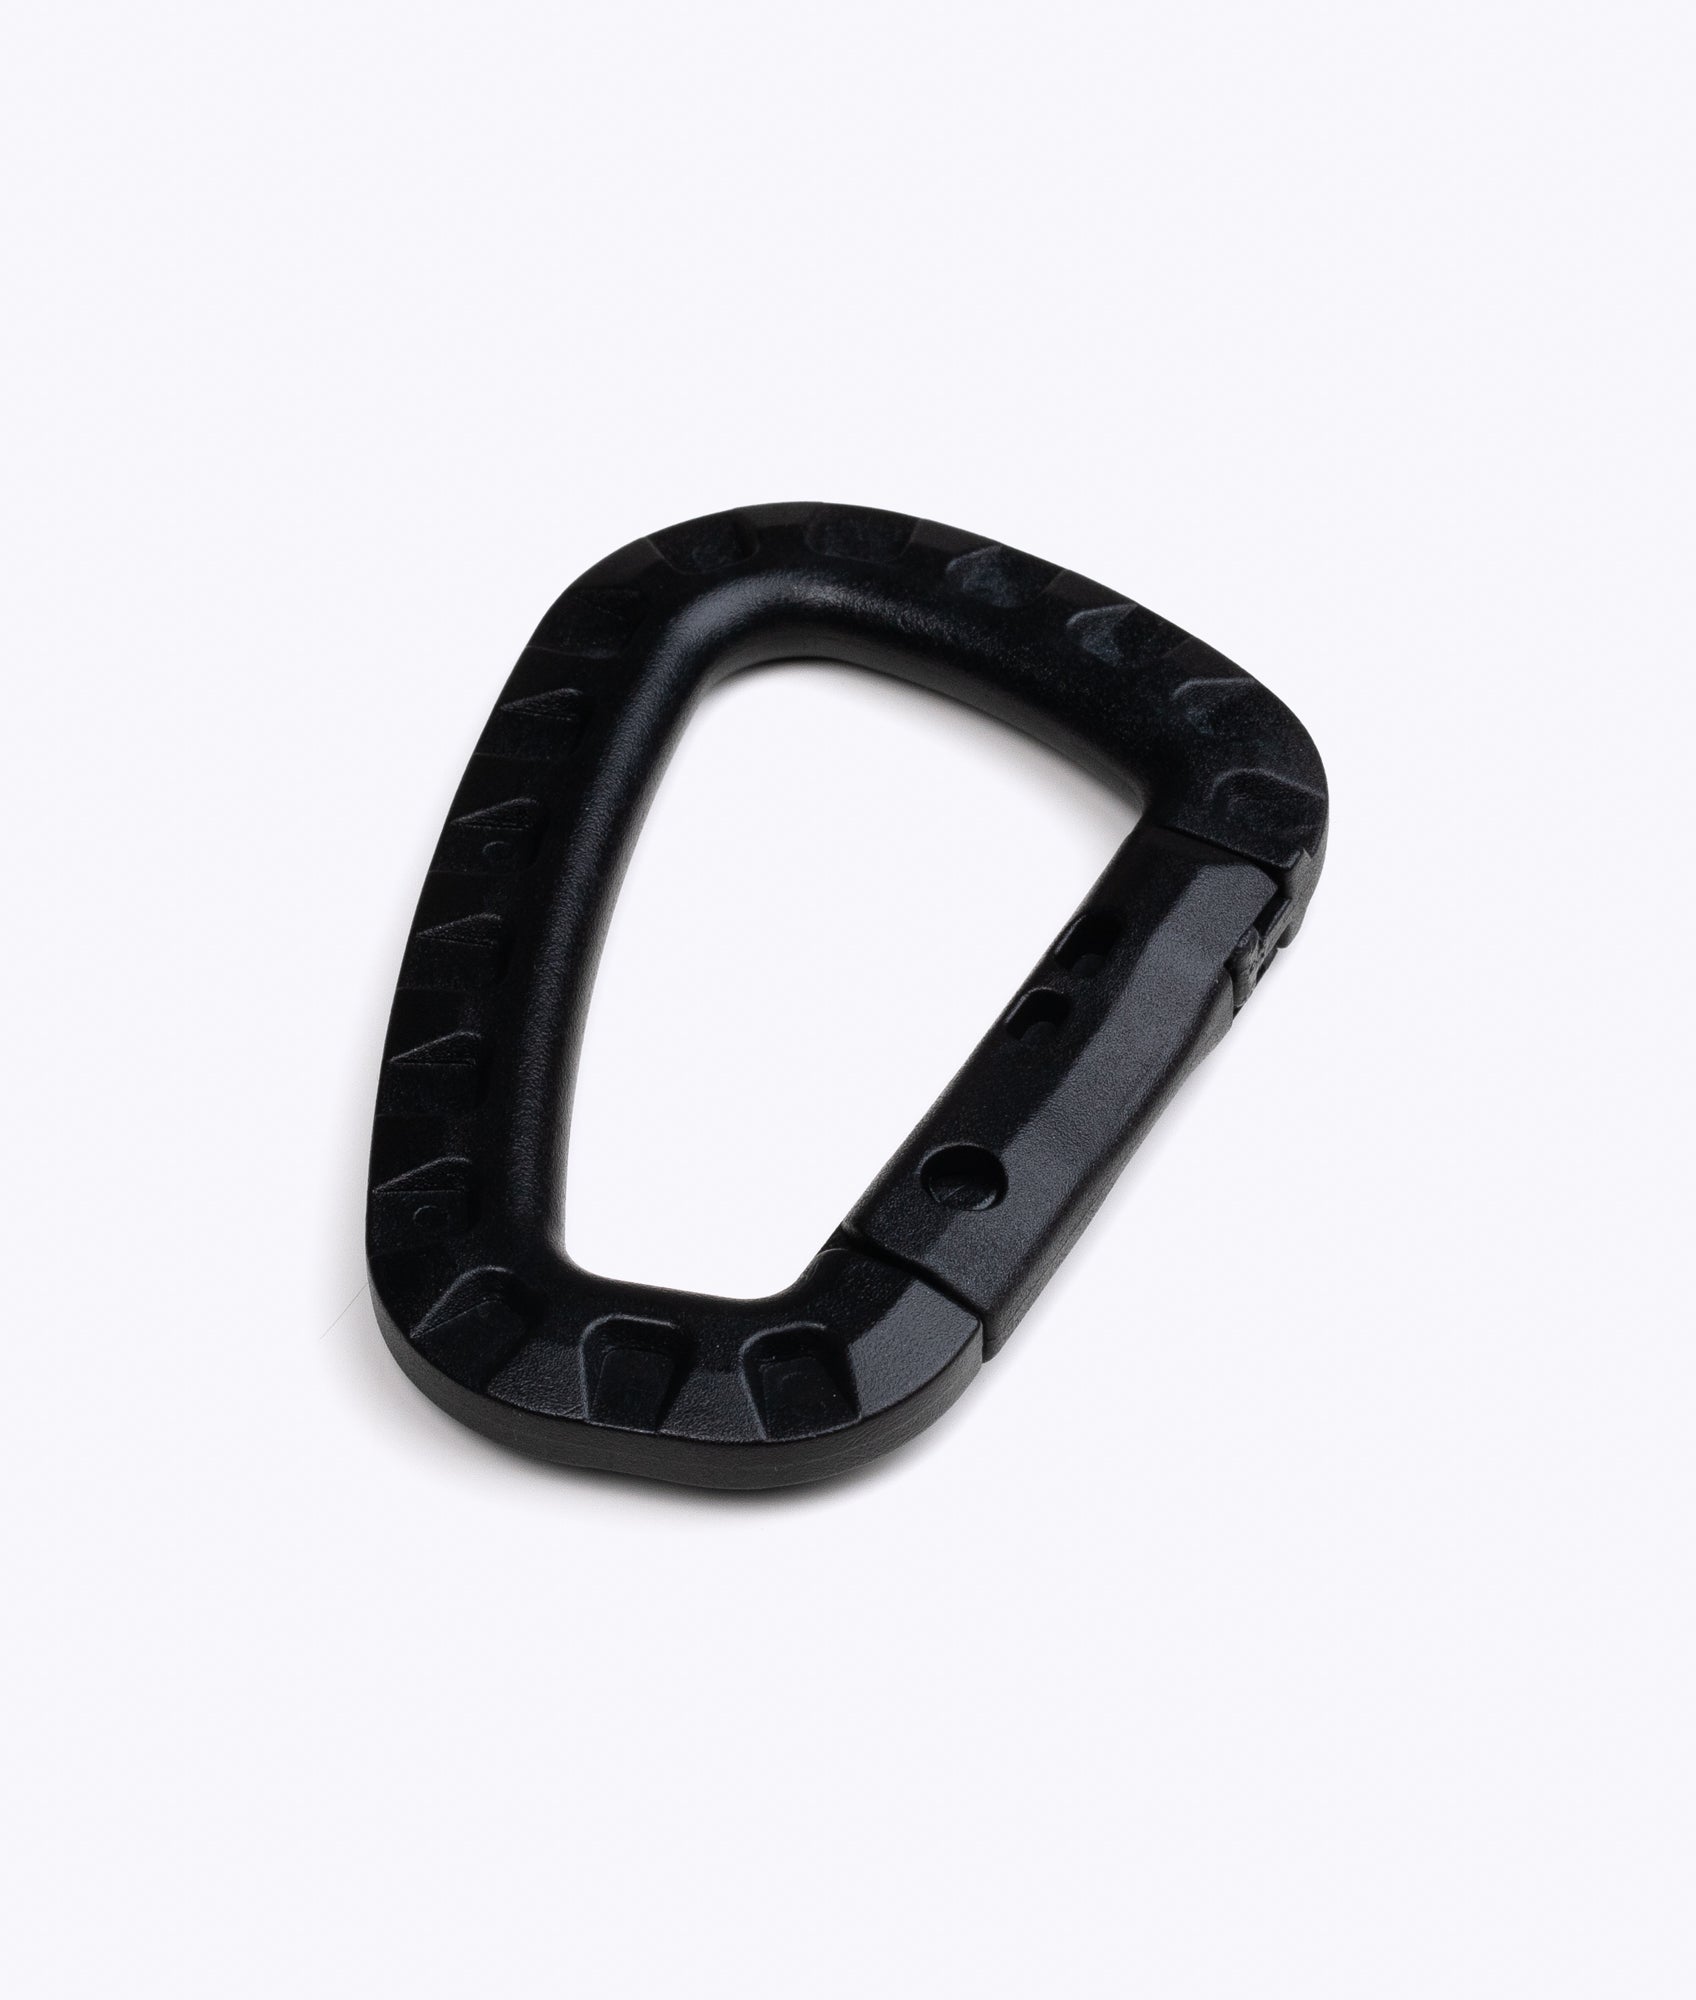 FREE GIFT - Tactical Carabiner